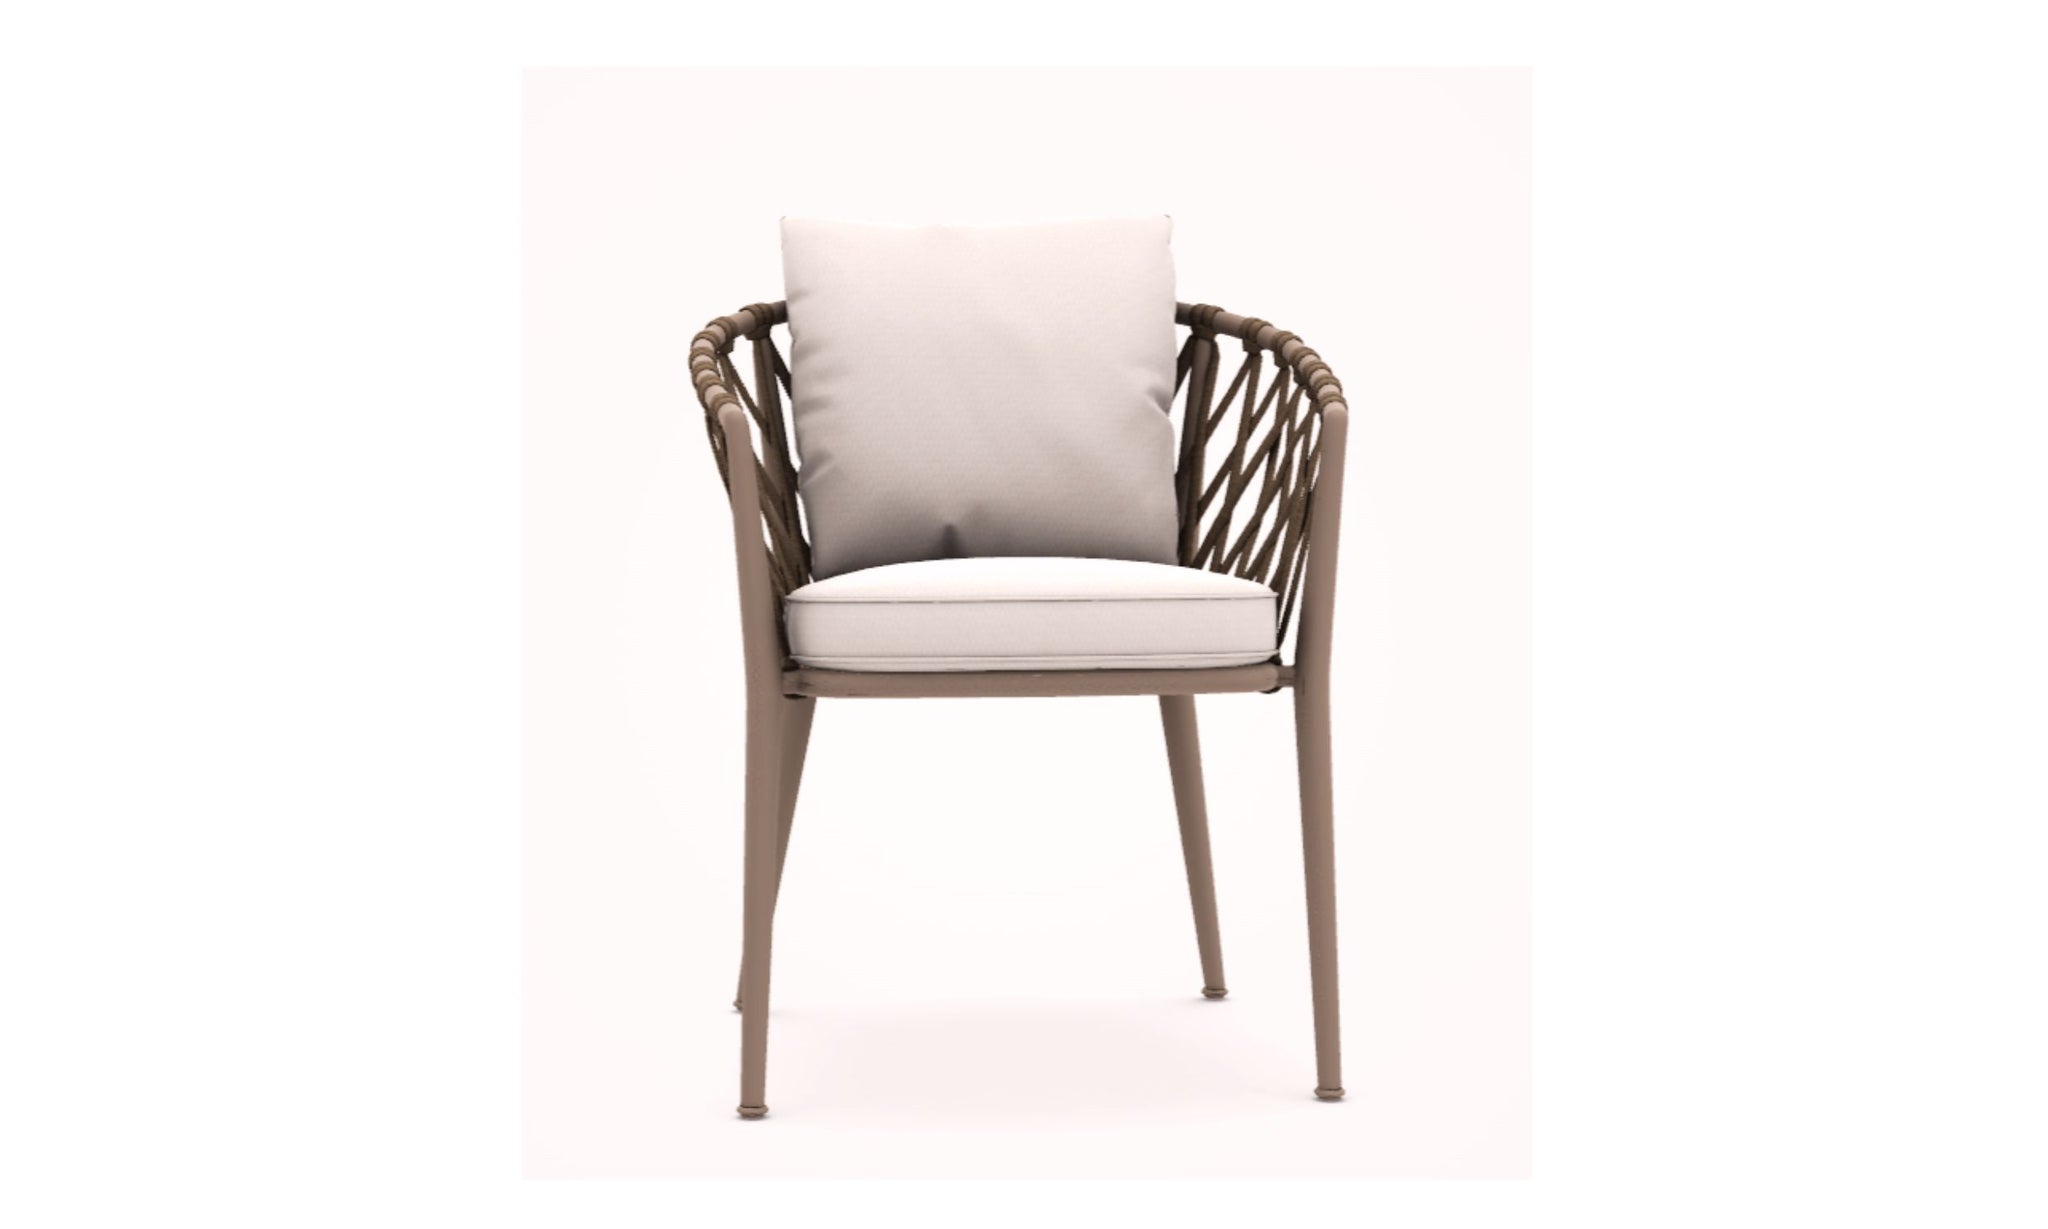 Erica Chair with armrests